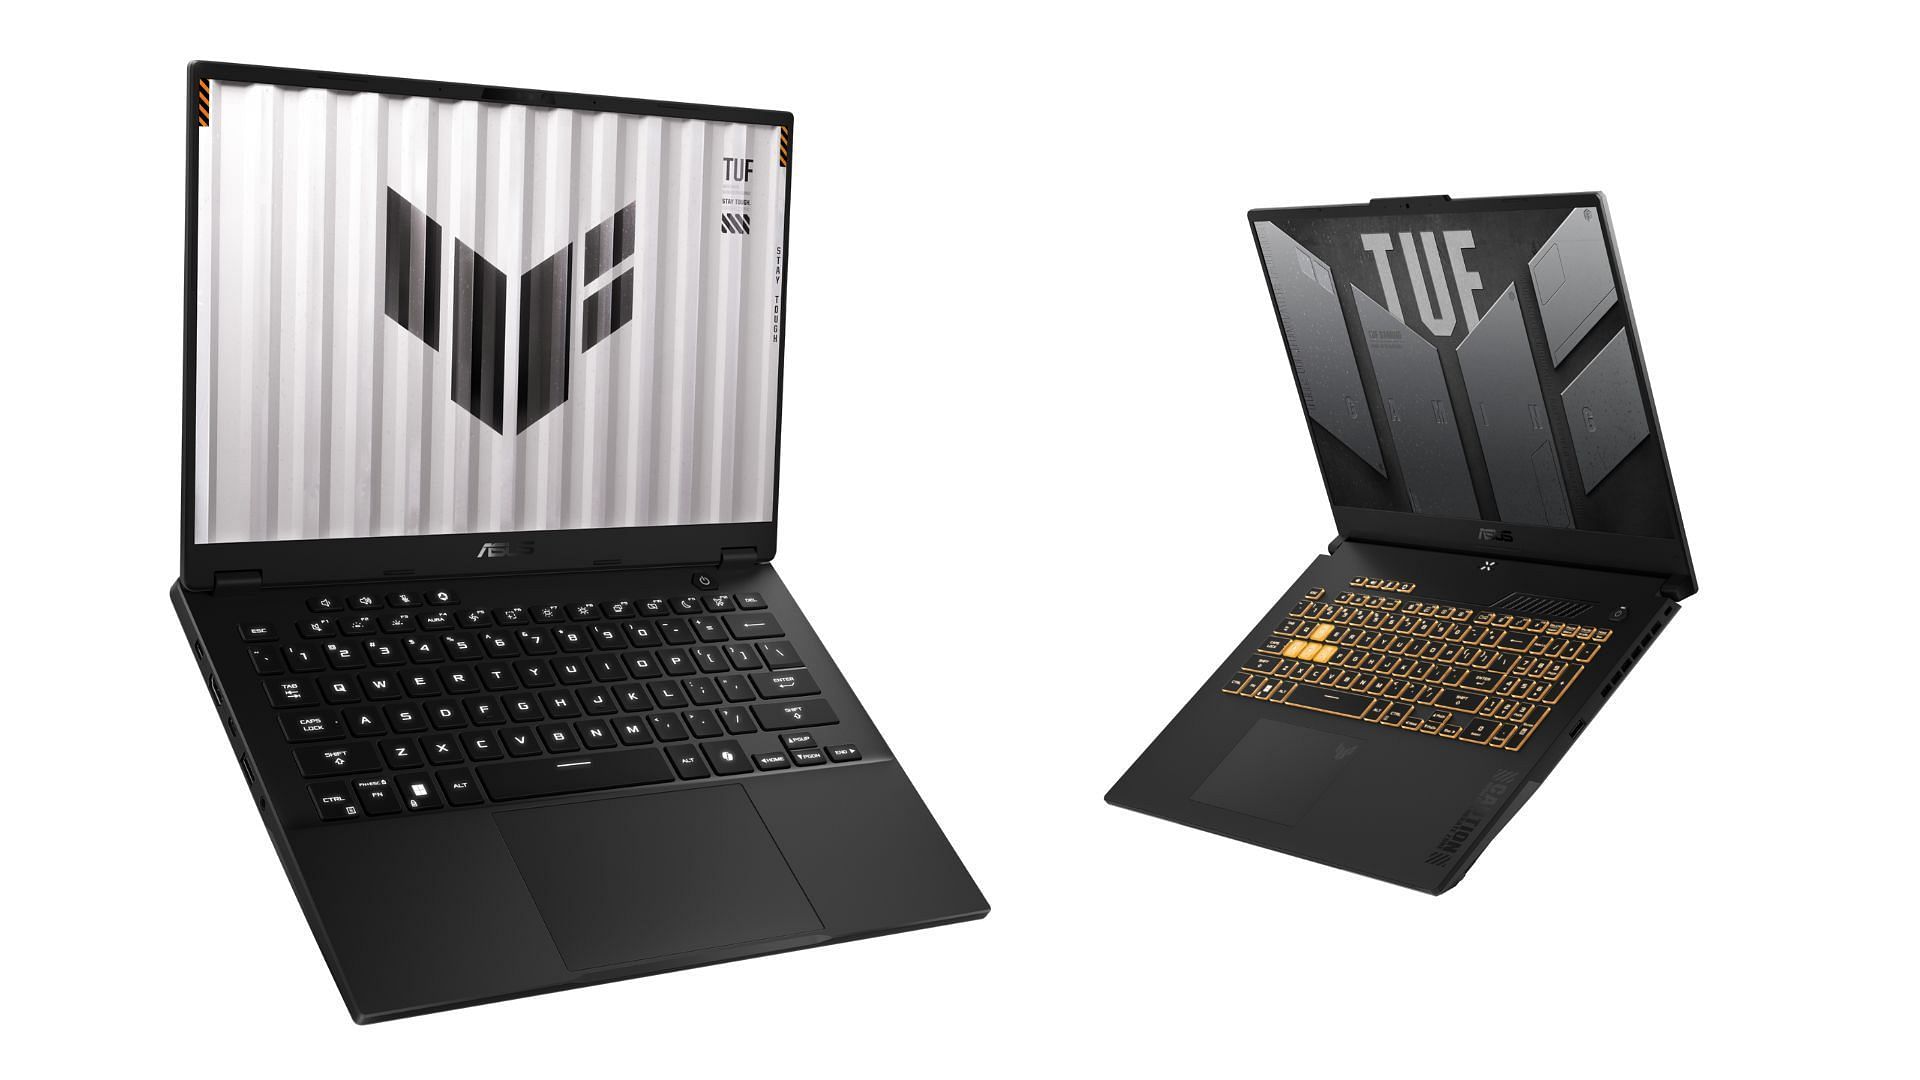 TUF Gaming laptops surpass Pulse laptops in terms of specifications (Image via Asus)